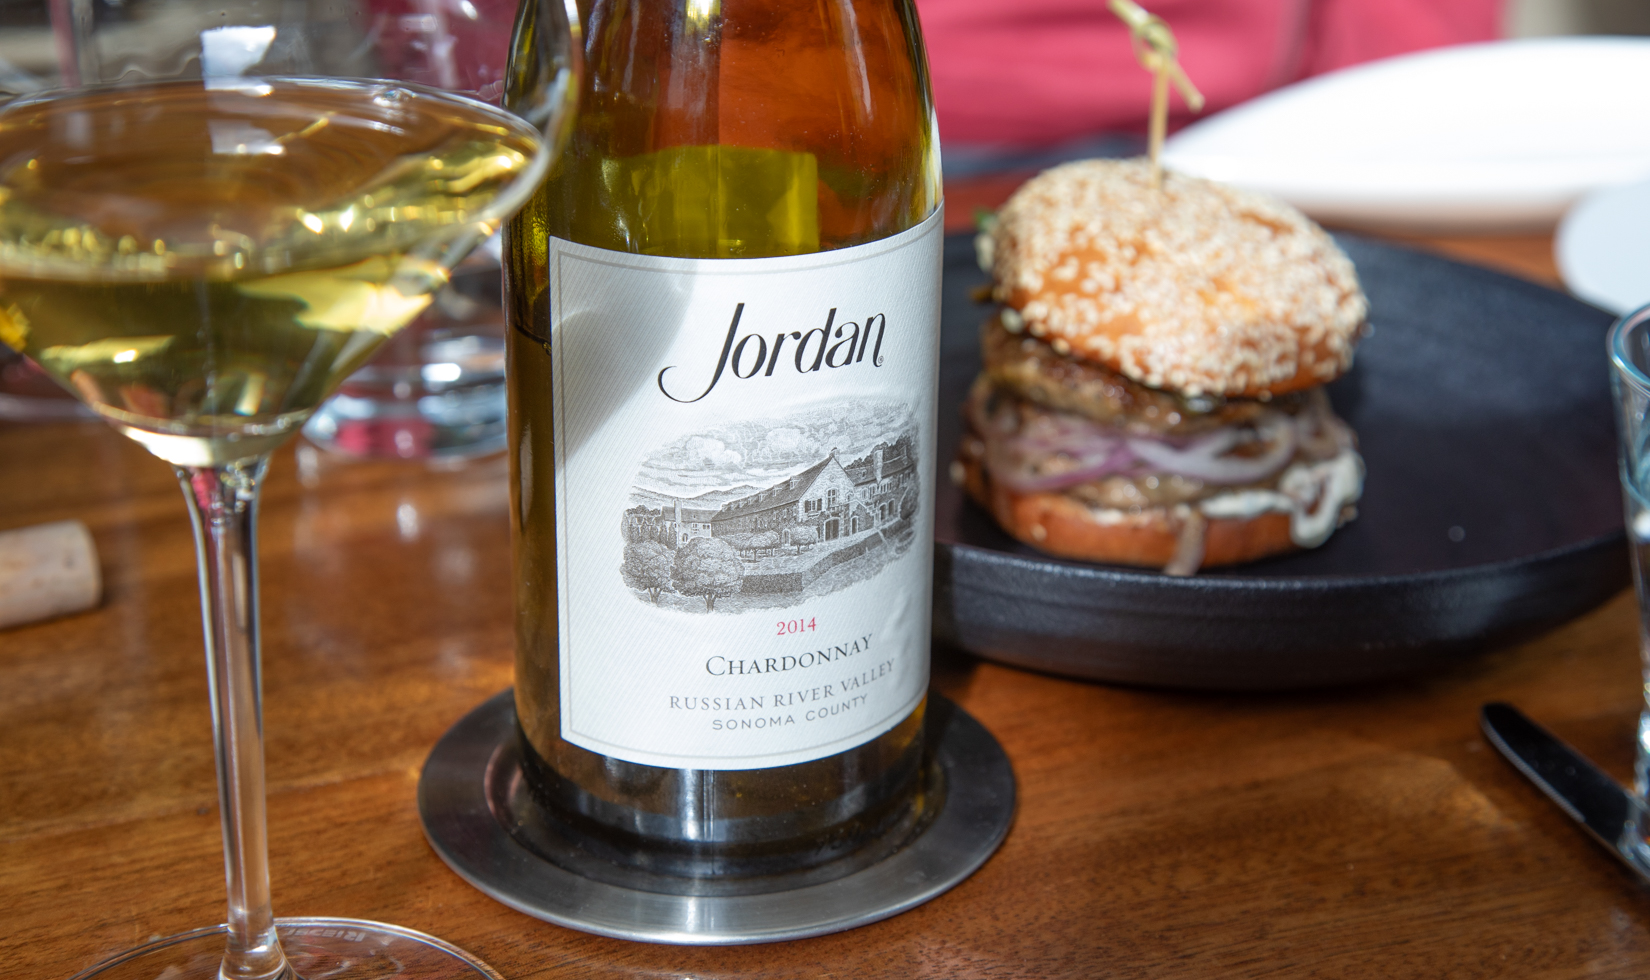 bottle of chardonnay with wine glass, wine list menu and burger on a plate in the background